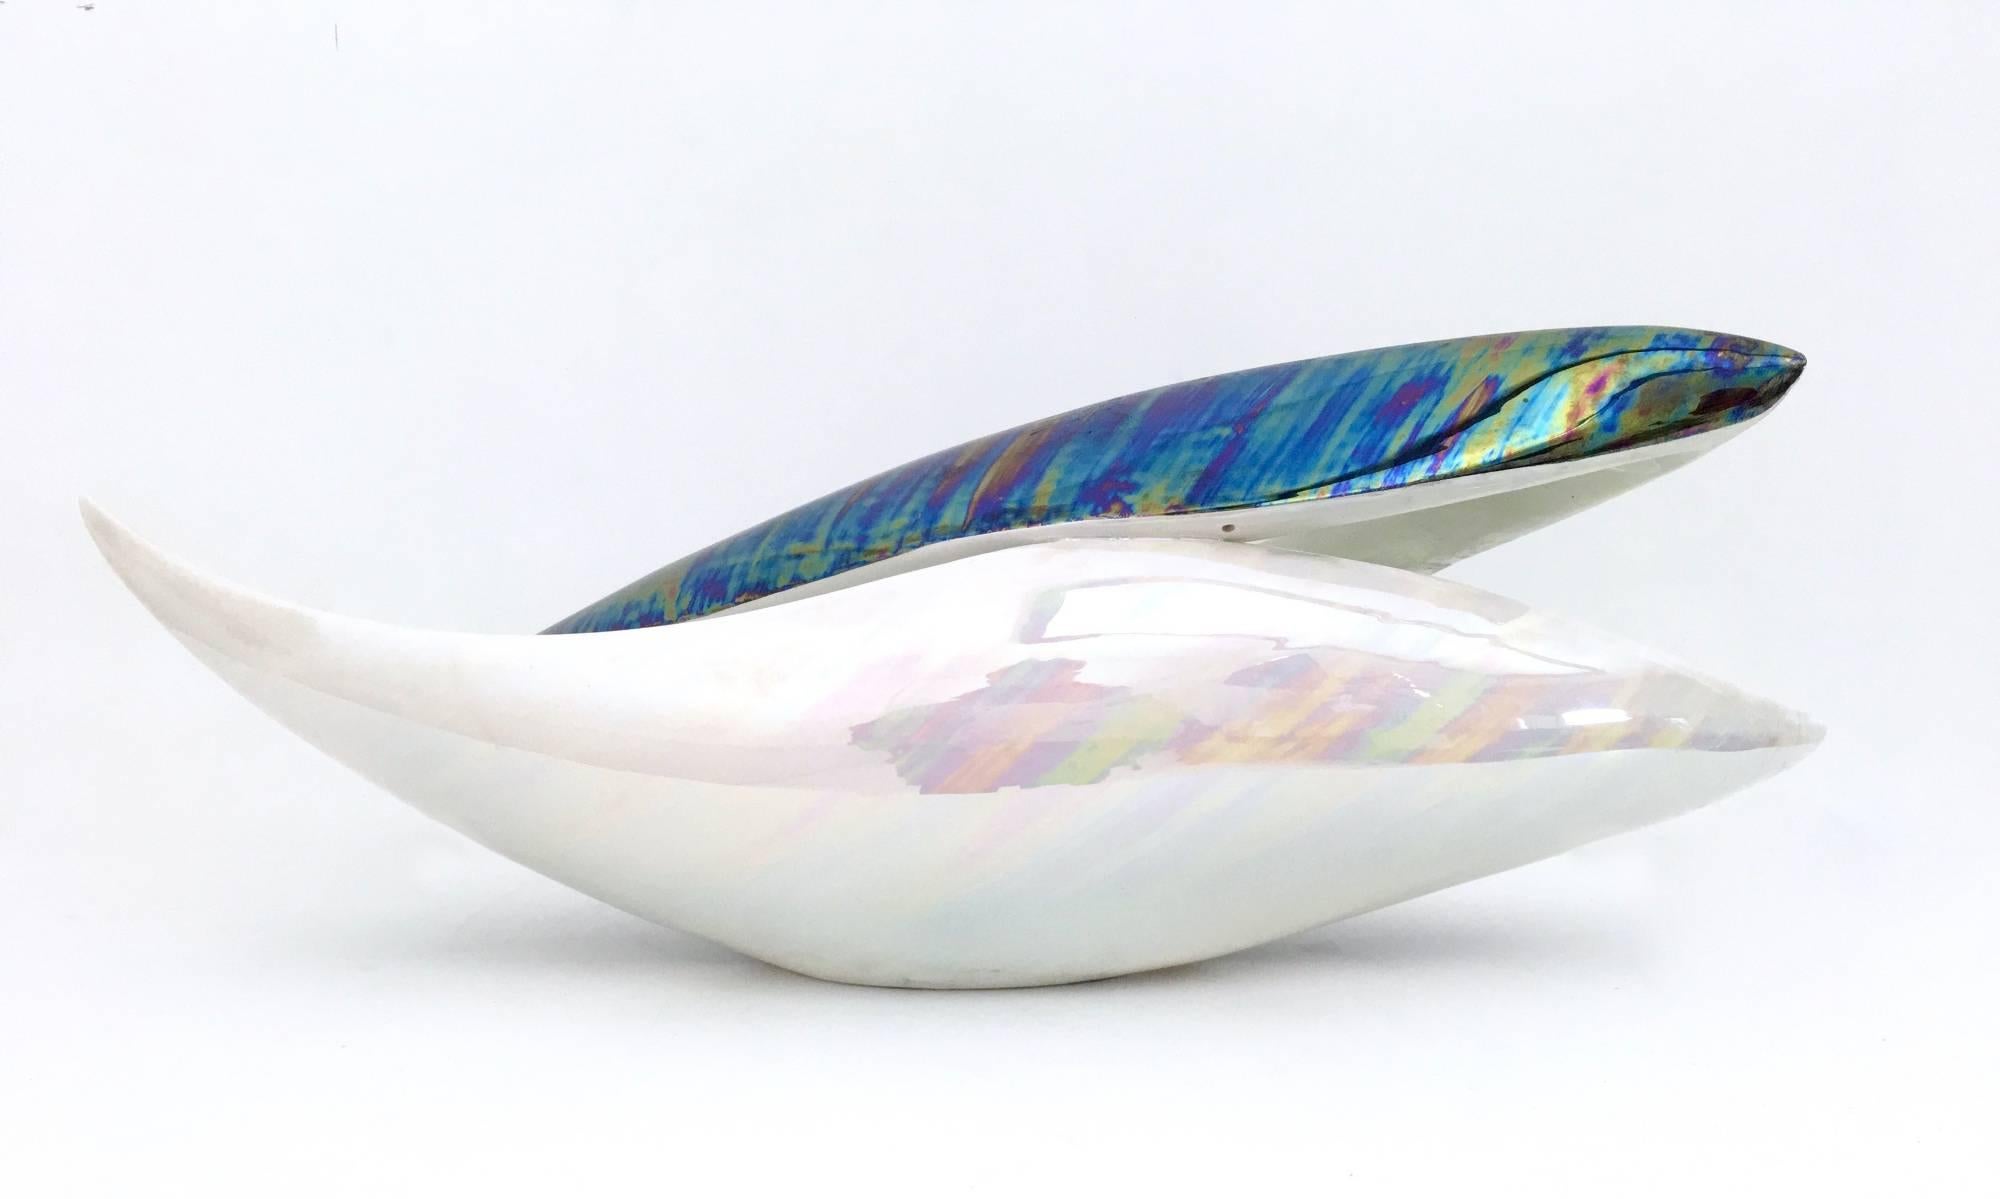 Italian Vintage White and Iridescent Ceramic Bowl or Centerpiece n 6768 by Lusso, Italy